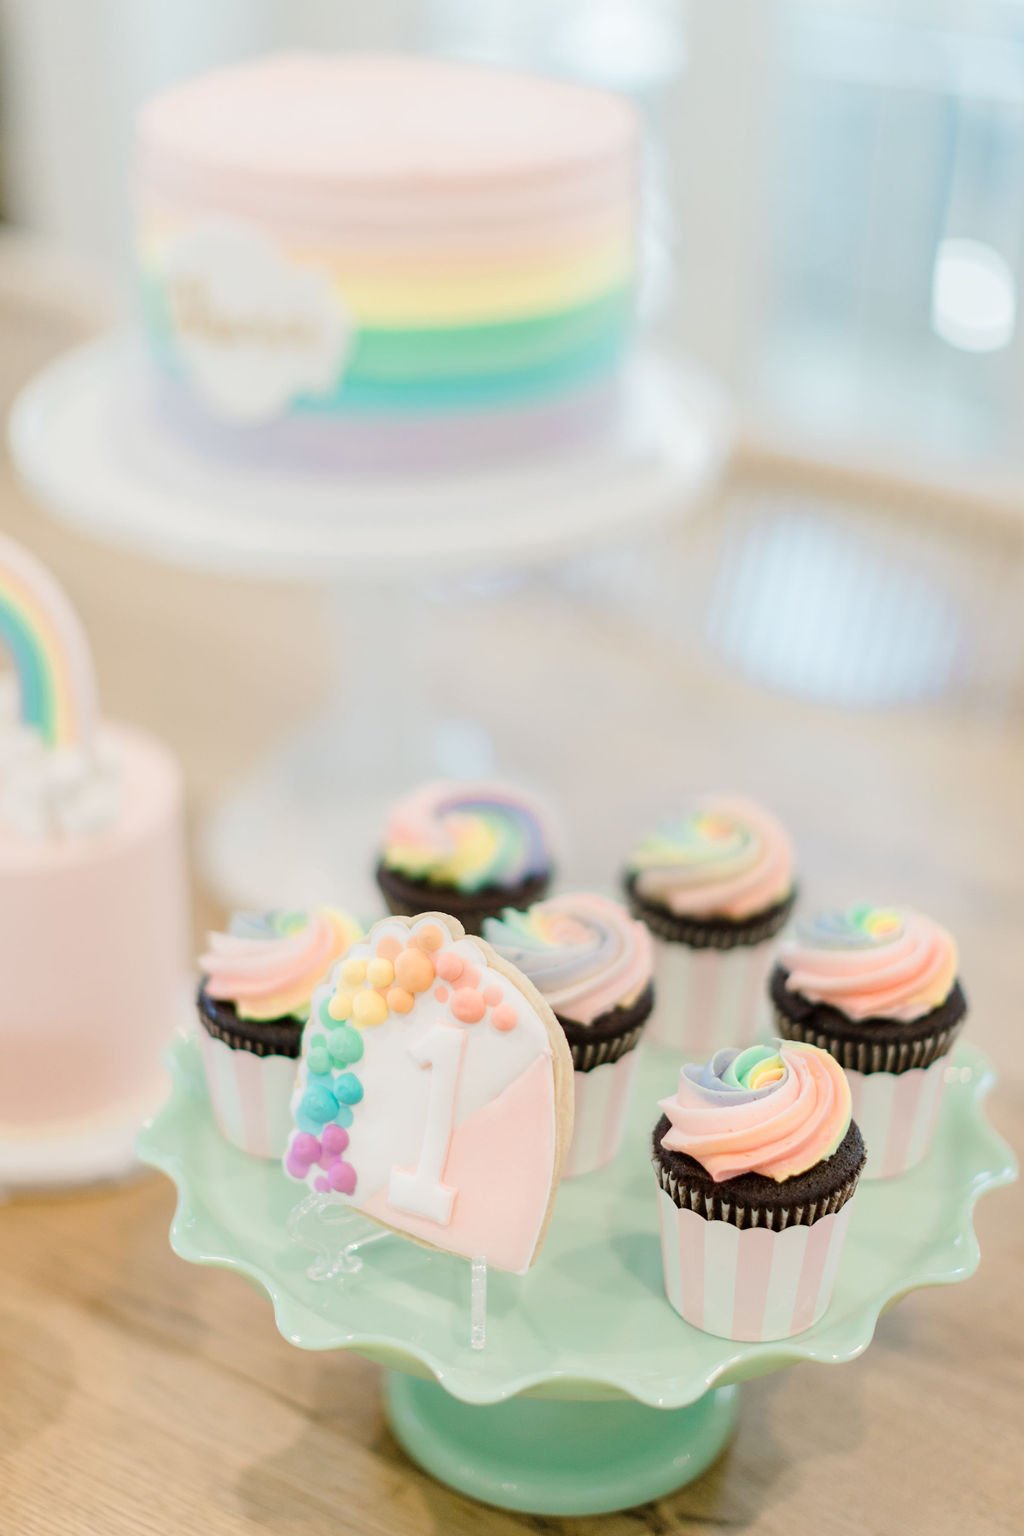 Rainbow First Birthday Dessert Table  - get details and more Rainbow Party inspiration at www.minteventdesign.com!